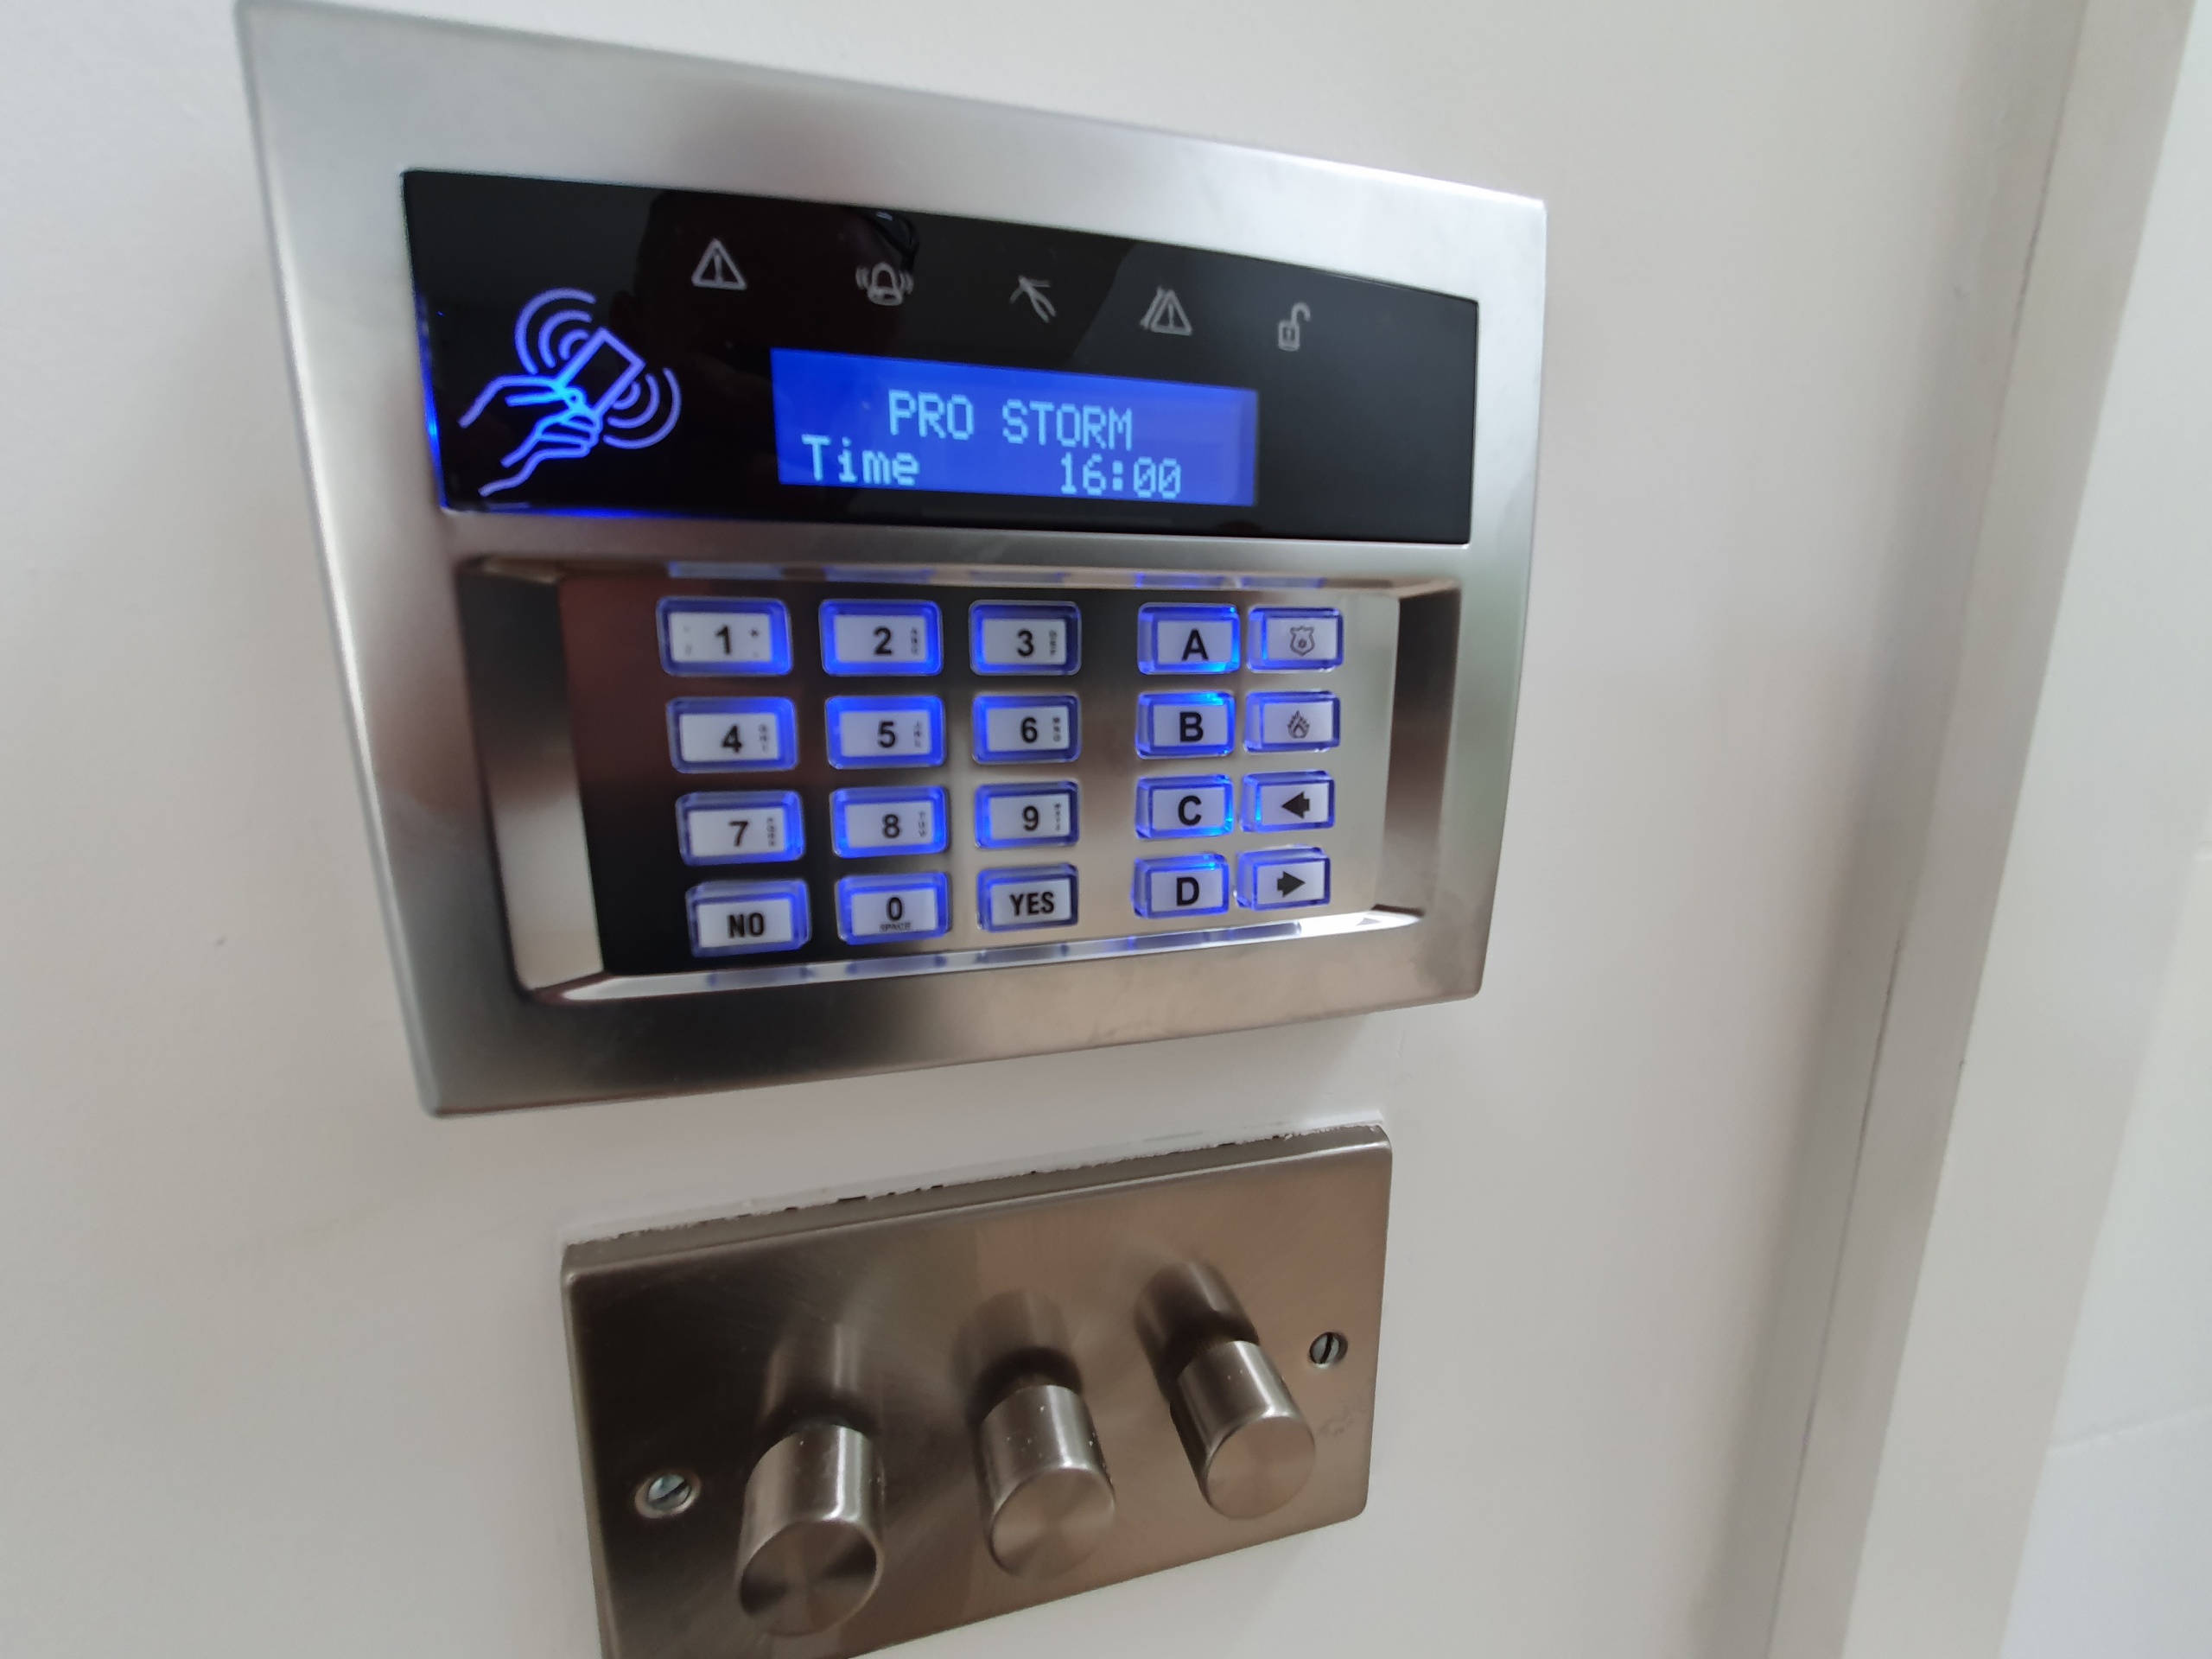 Alarm panel for domestic and commercial CCTV / alarm solutions